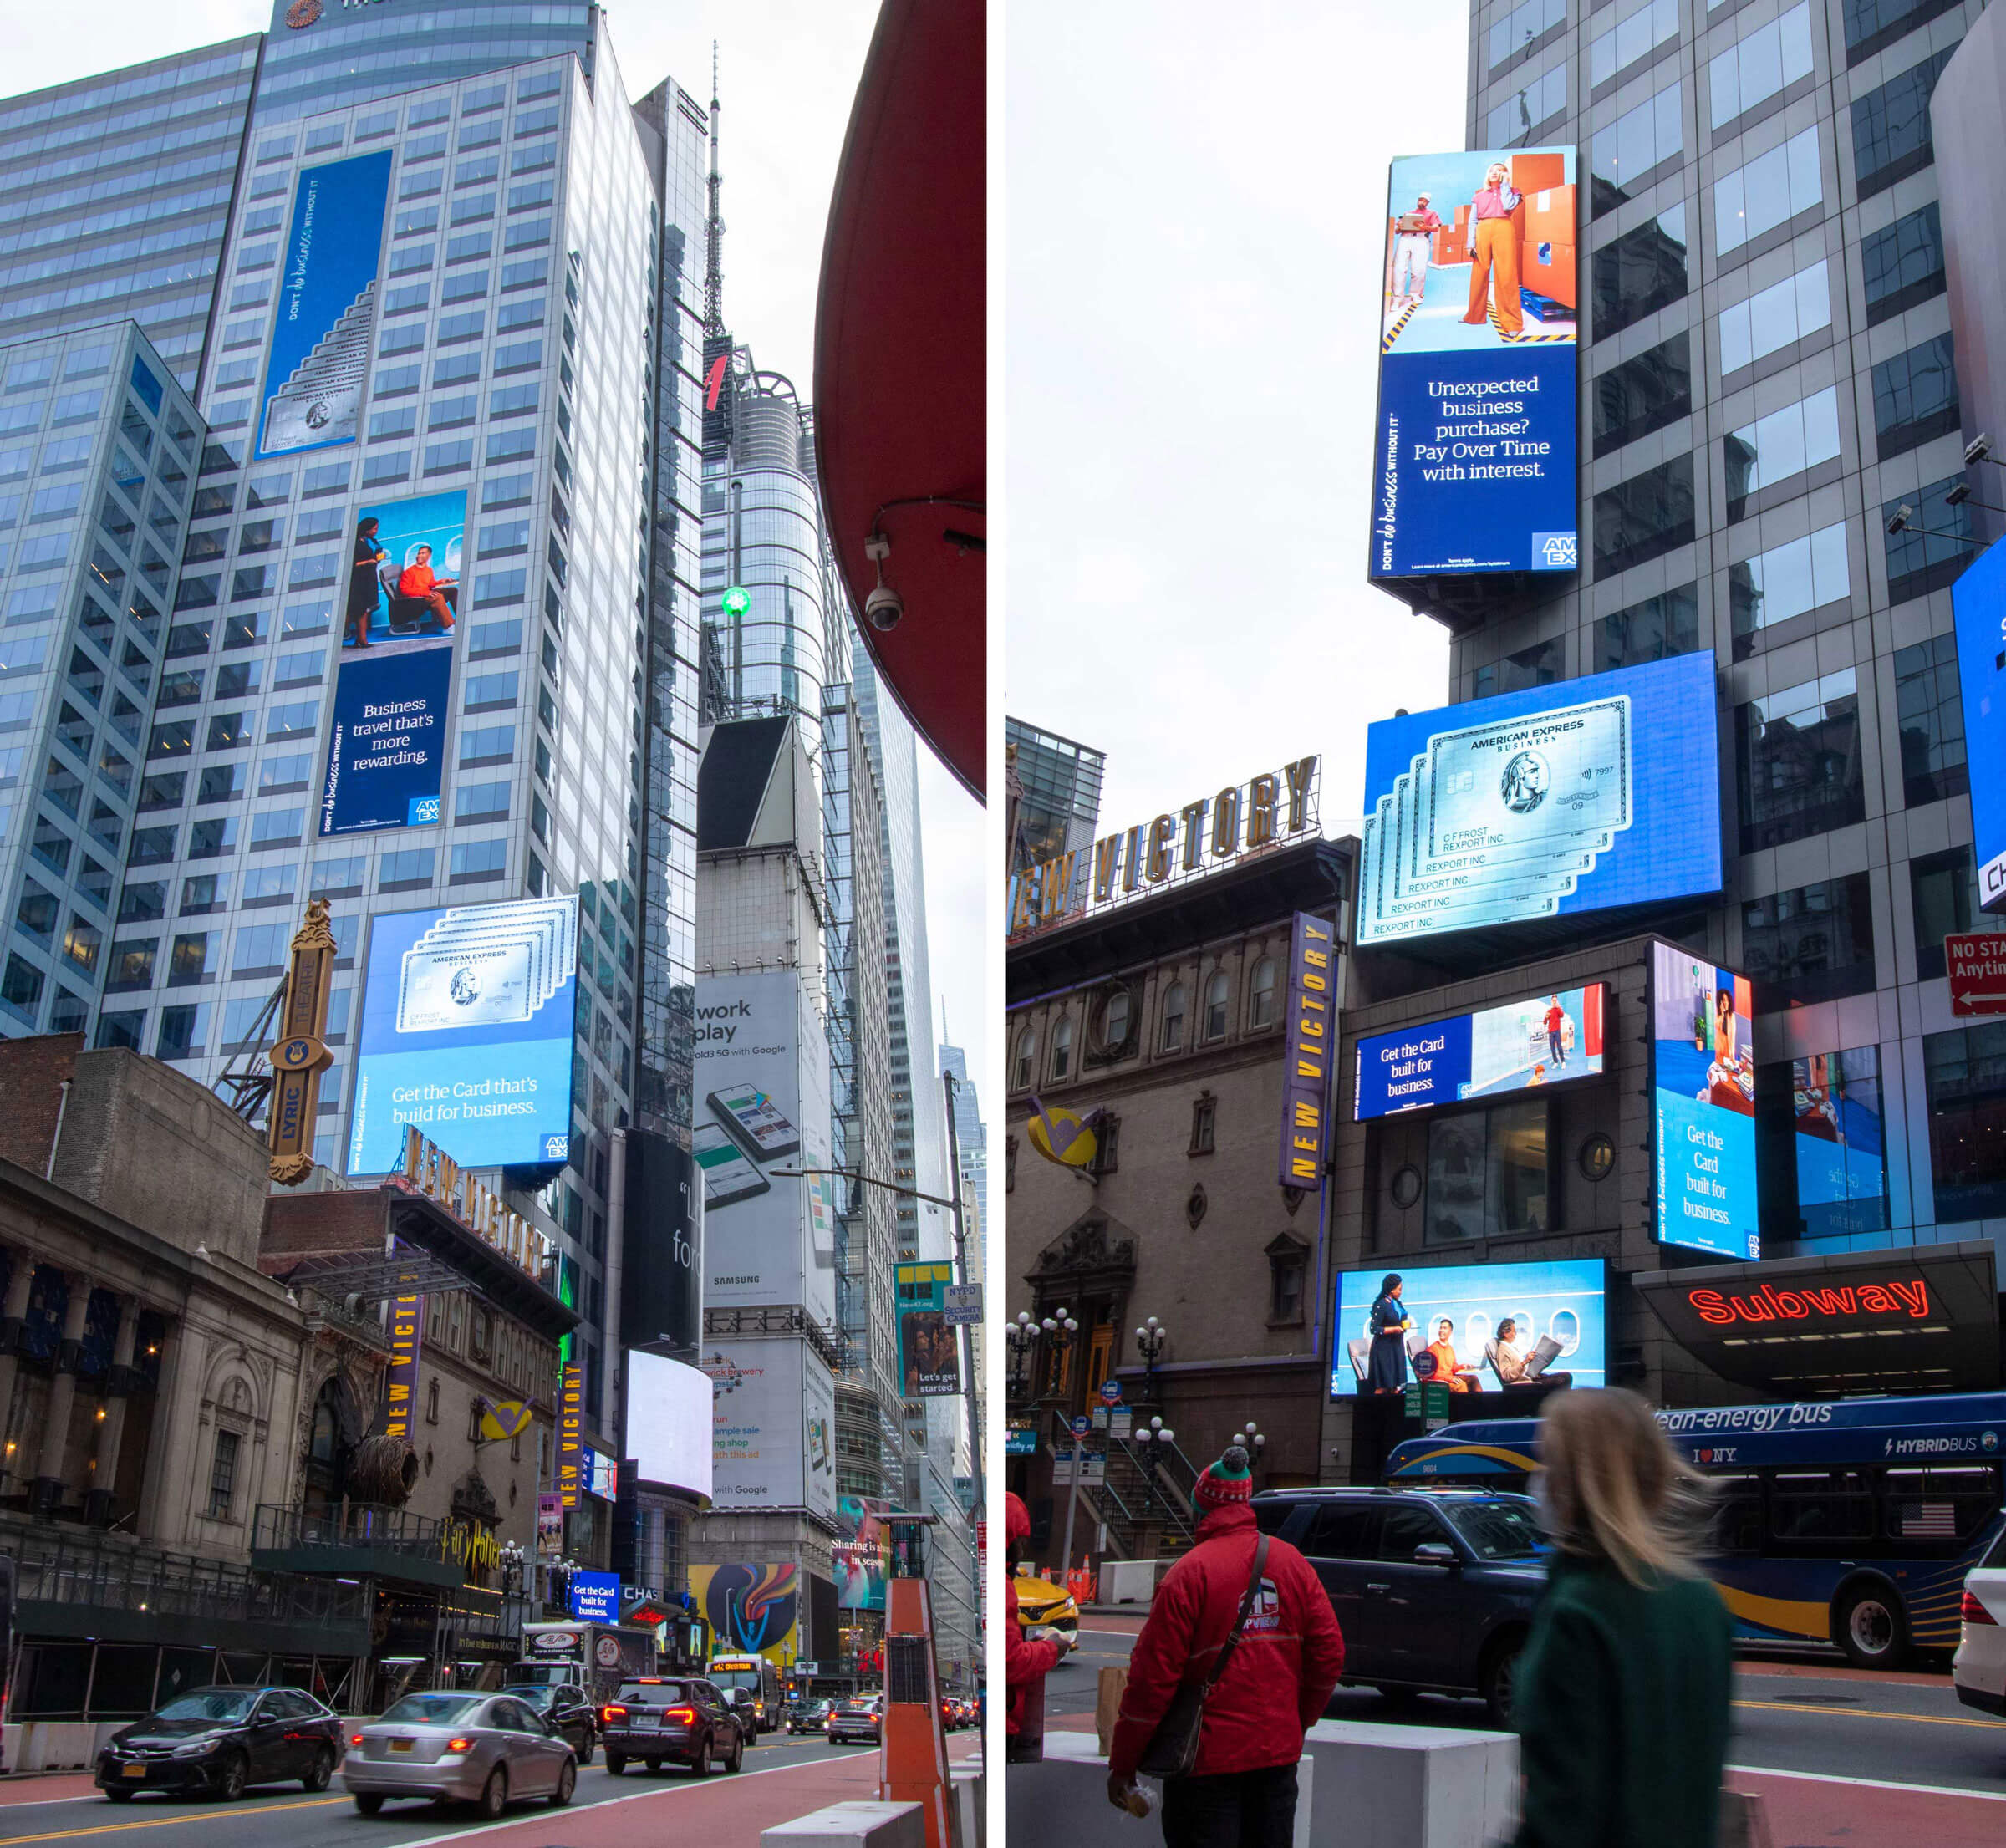 Two photos showing a variety of screens on the side of buildings